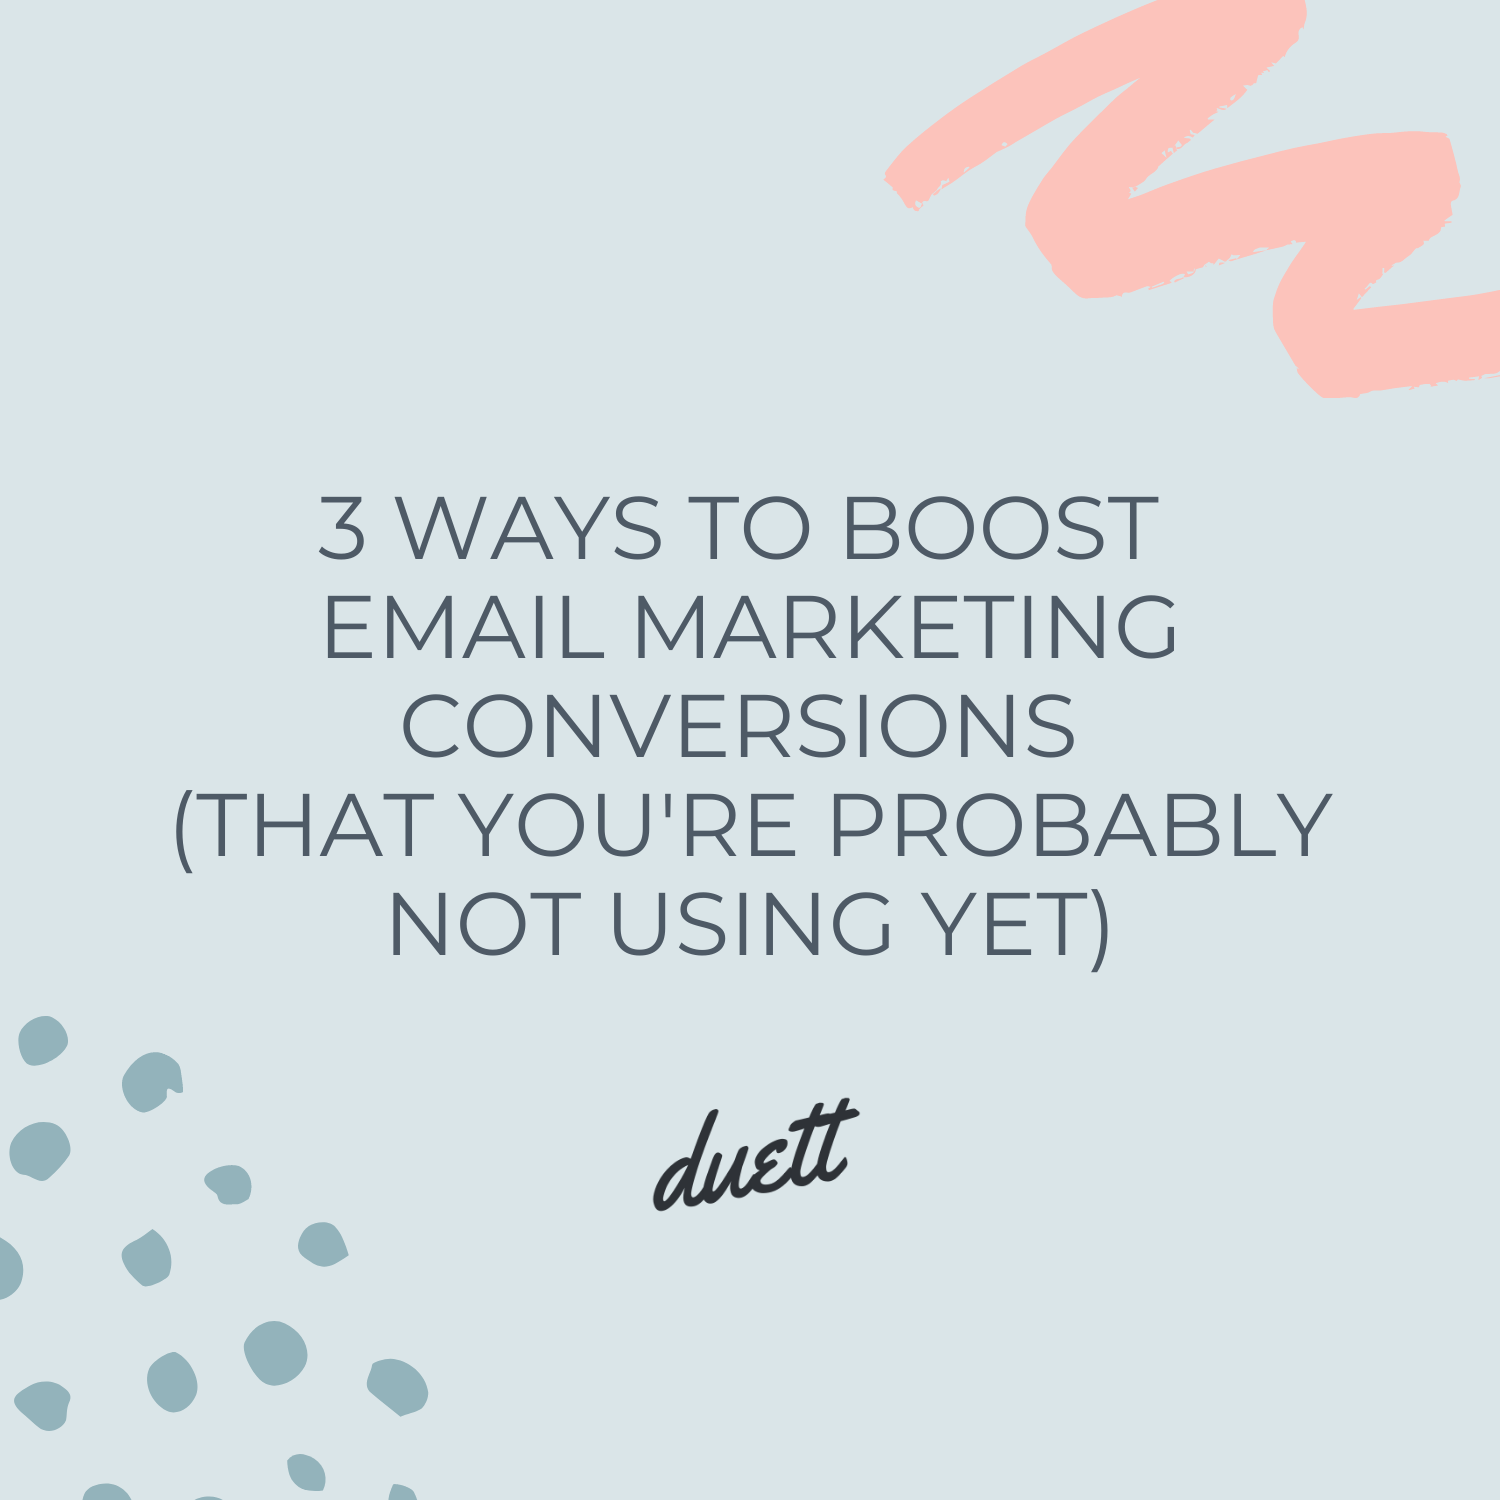 3 Ways to Boost Email Marketing Conversions (That You're Probably Not Using Yet)